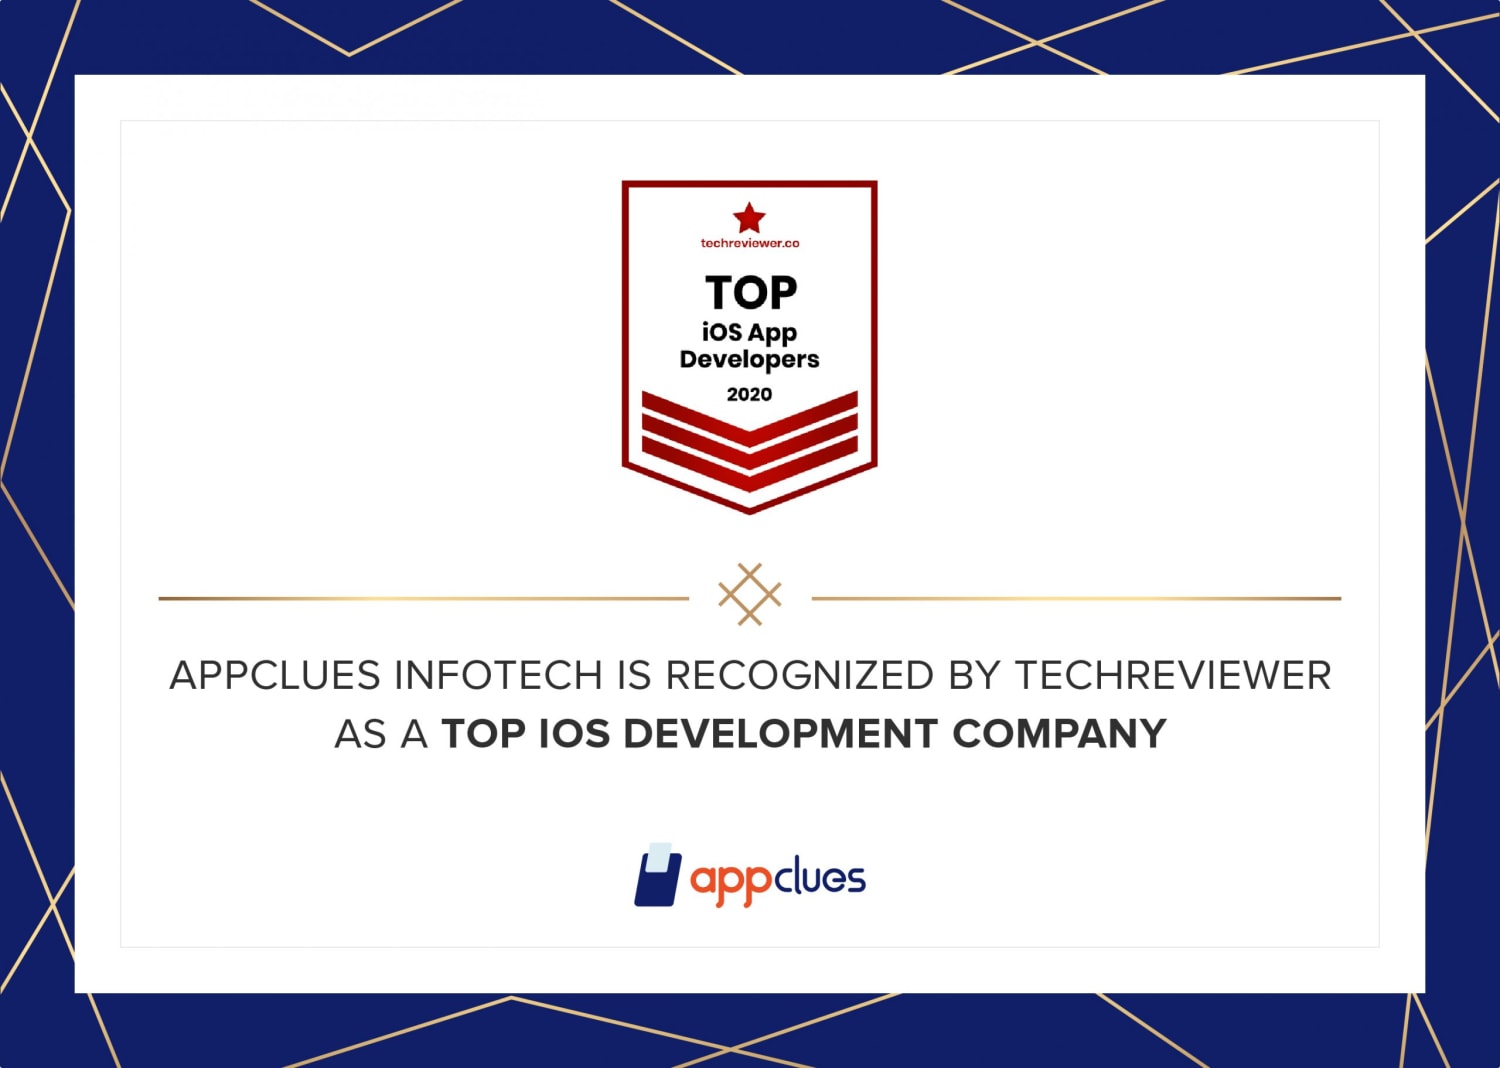 Top iOS Development Company in 2020 Recognized by Techreviewer